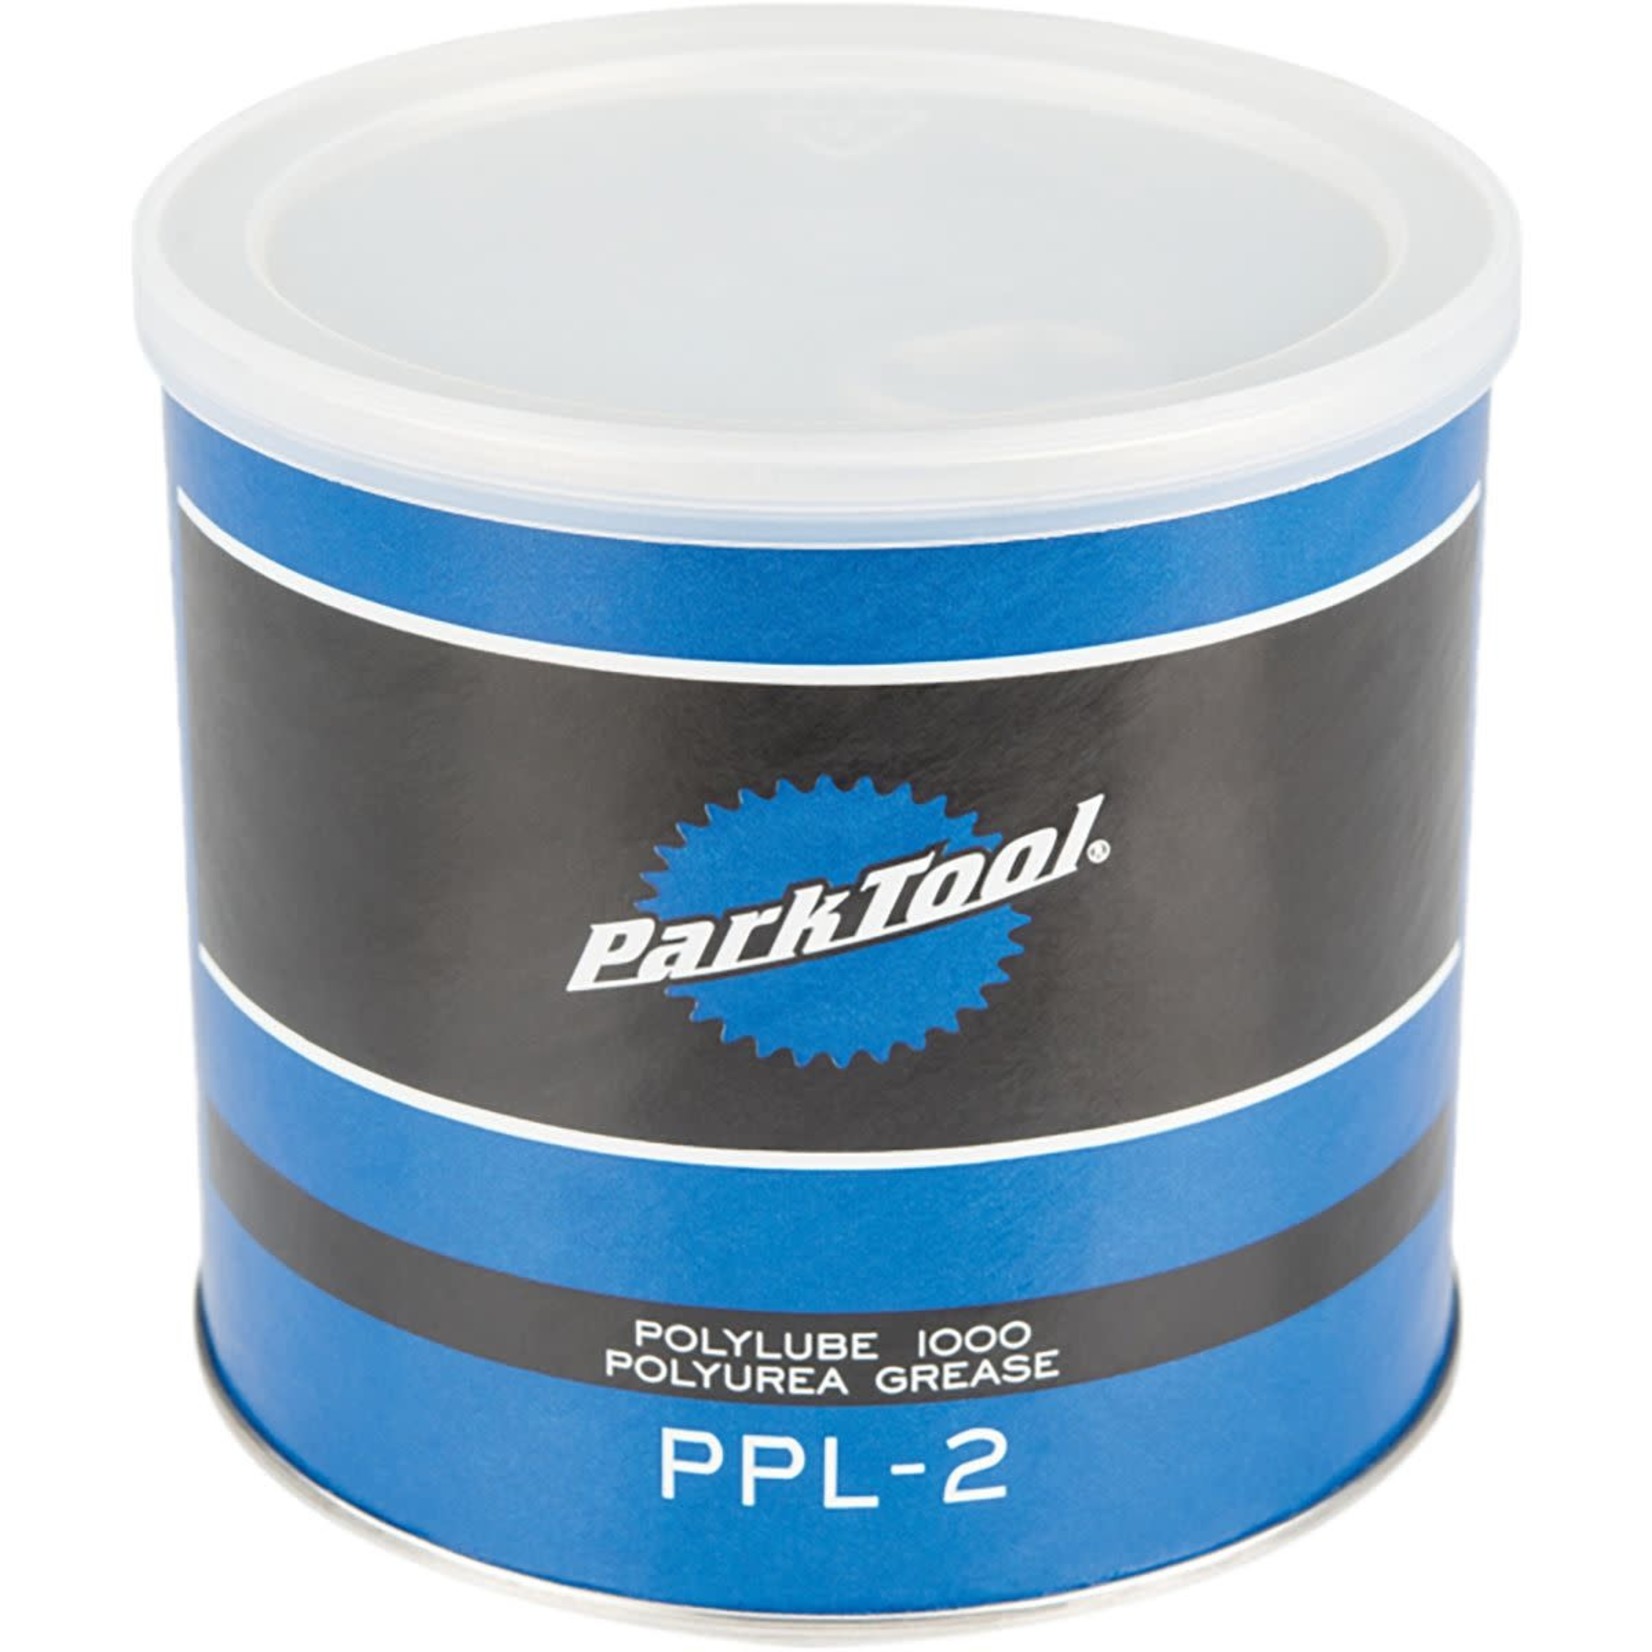 PARK TOOLS PolyLube 1000 Grease, PPL-2 1lb Tub